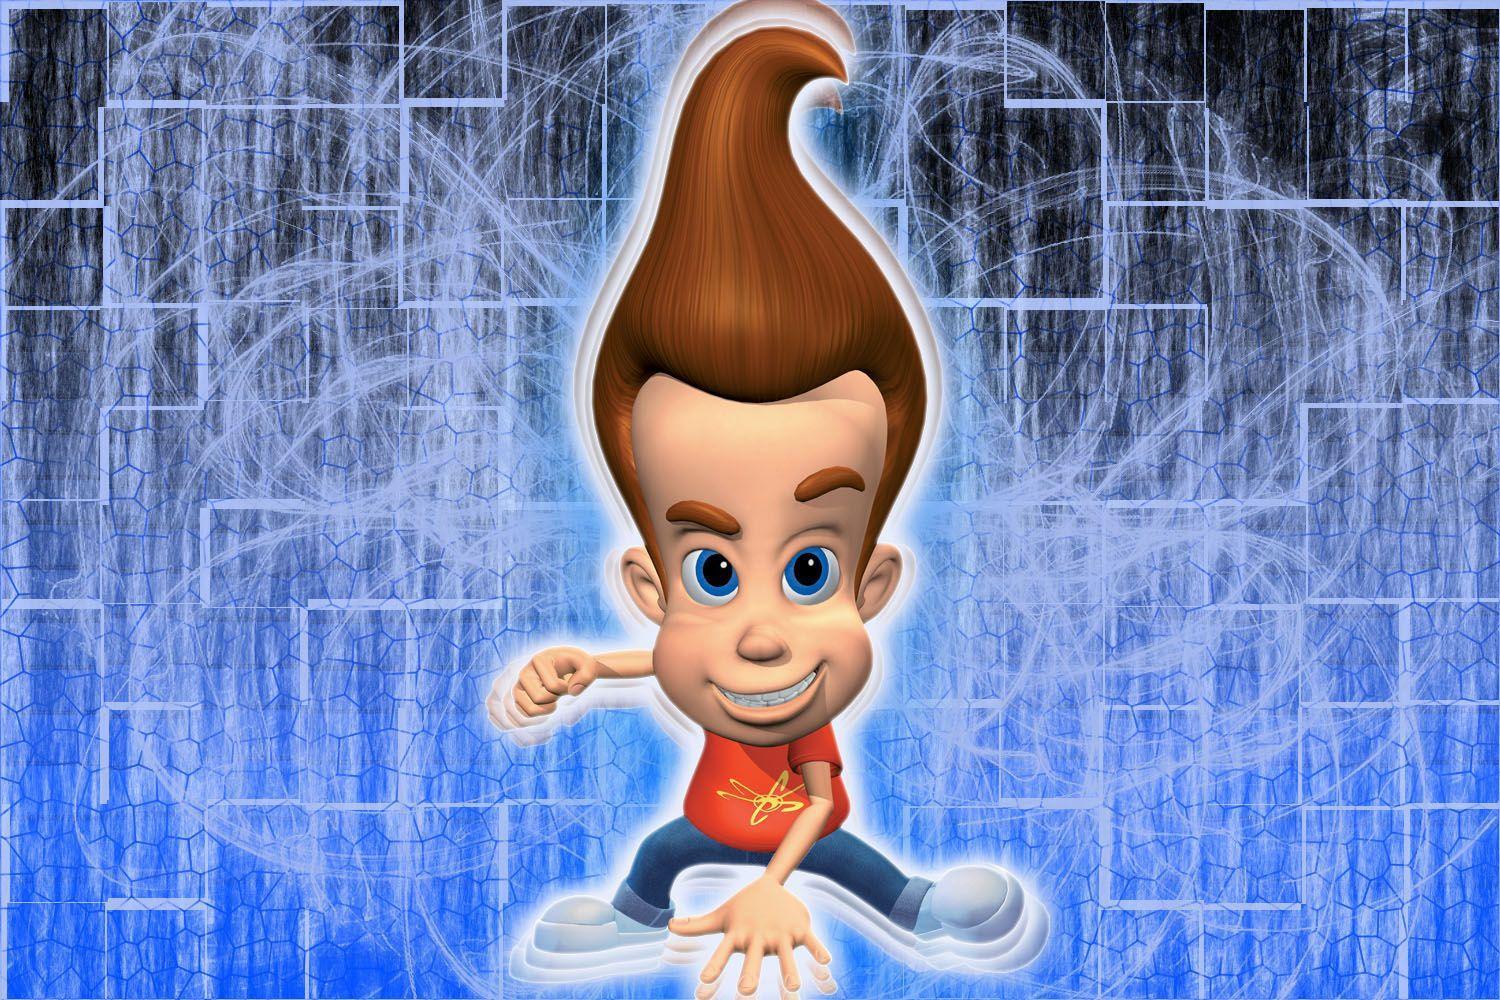 Jimmy Neutron full hd cover picture, Jimmy Neutron full hd cover.